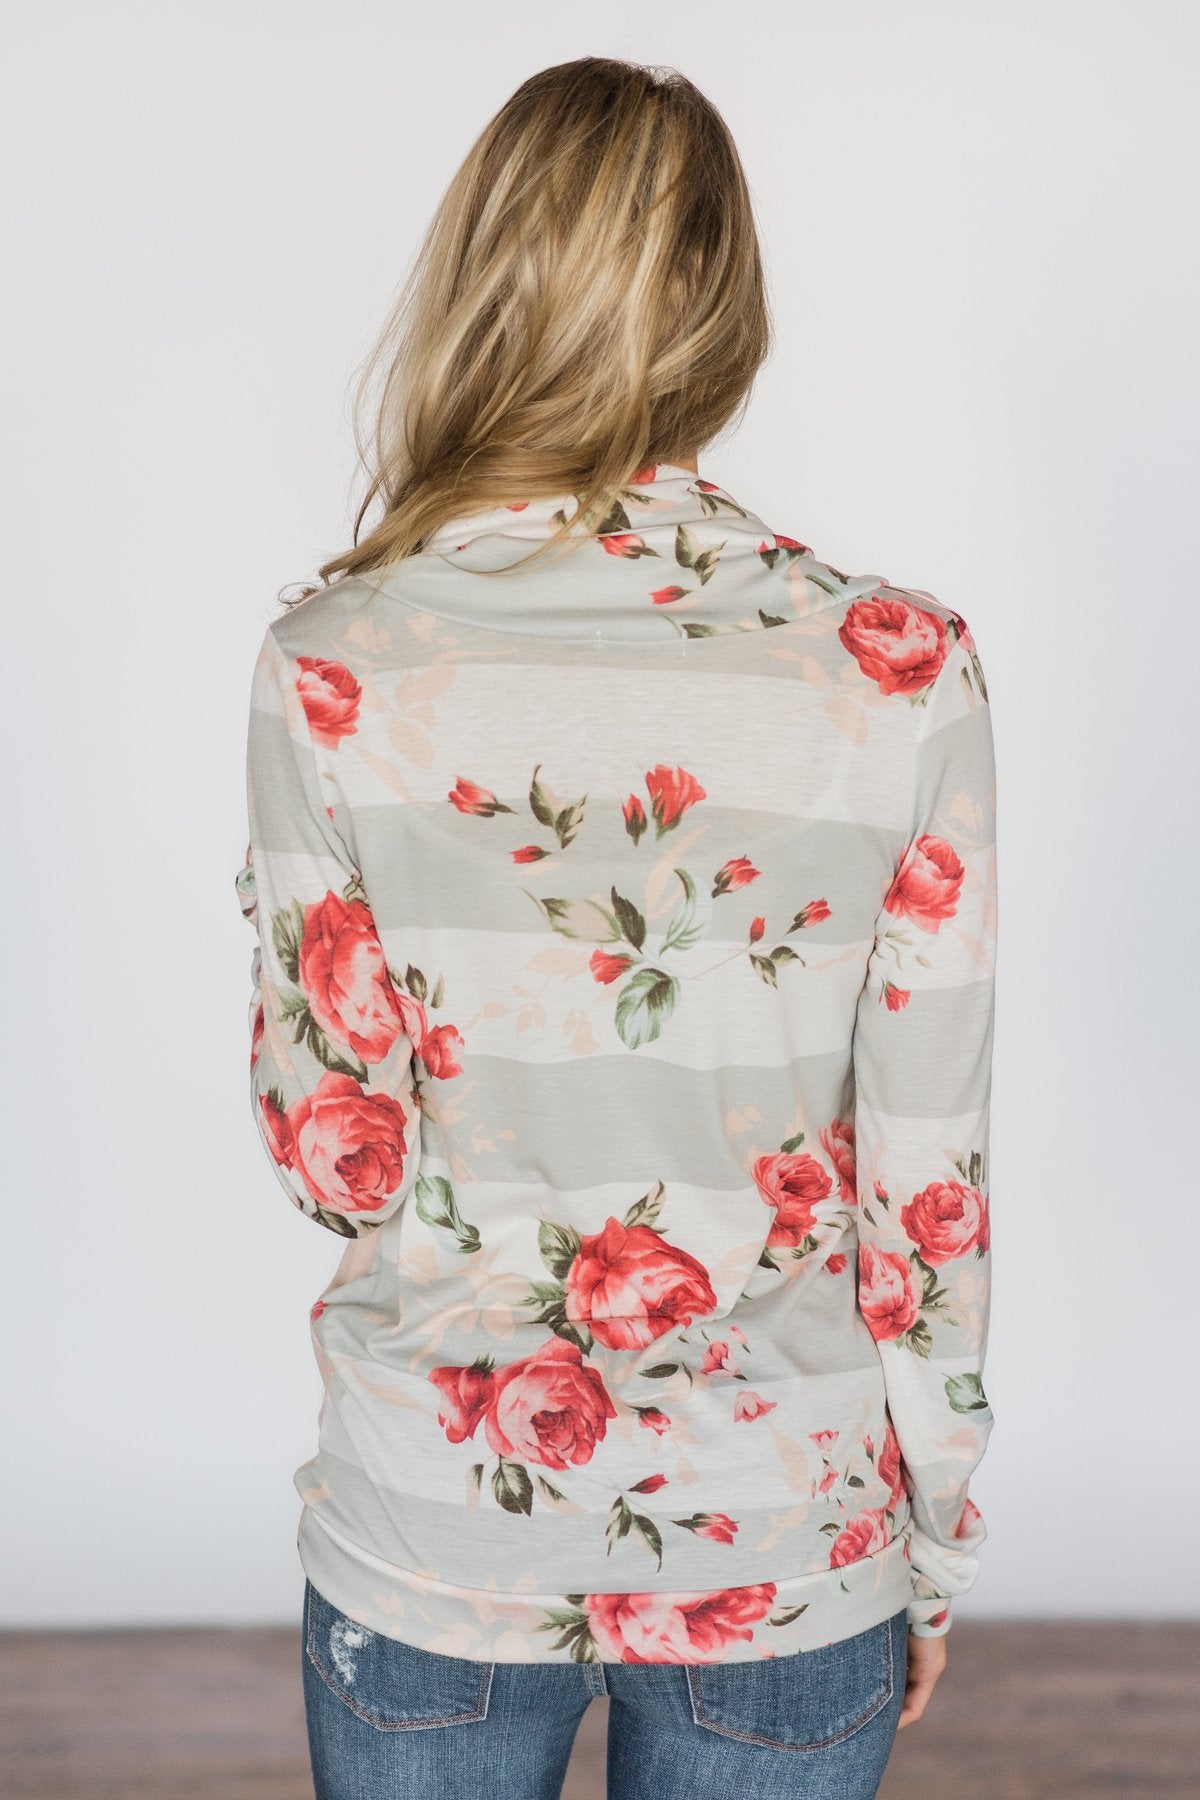 Flowers & You ~ Peach Striped & Floral Cowl Neck Top